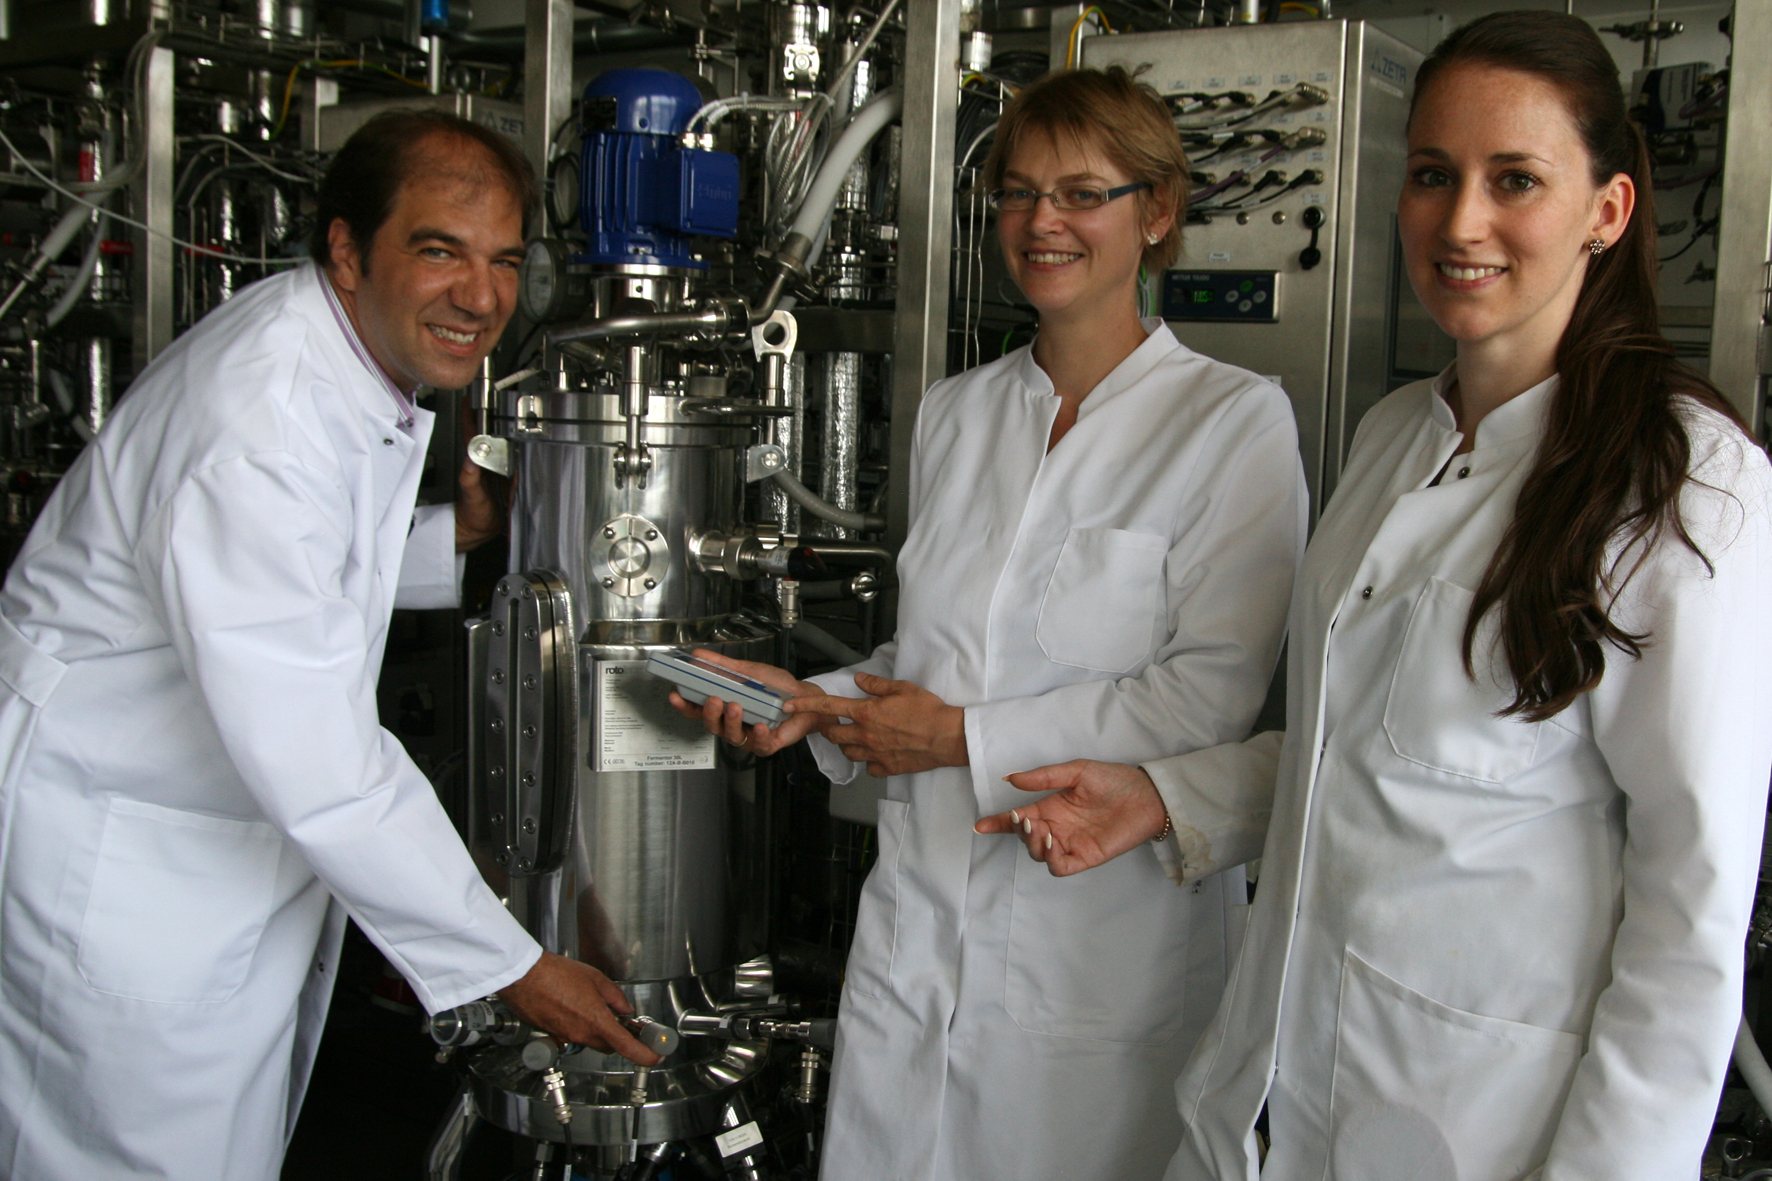 A man and two young women standing next to a bioreactor and smiling into the camera.